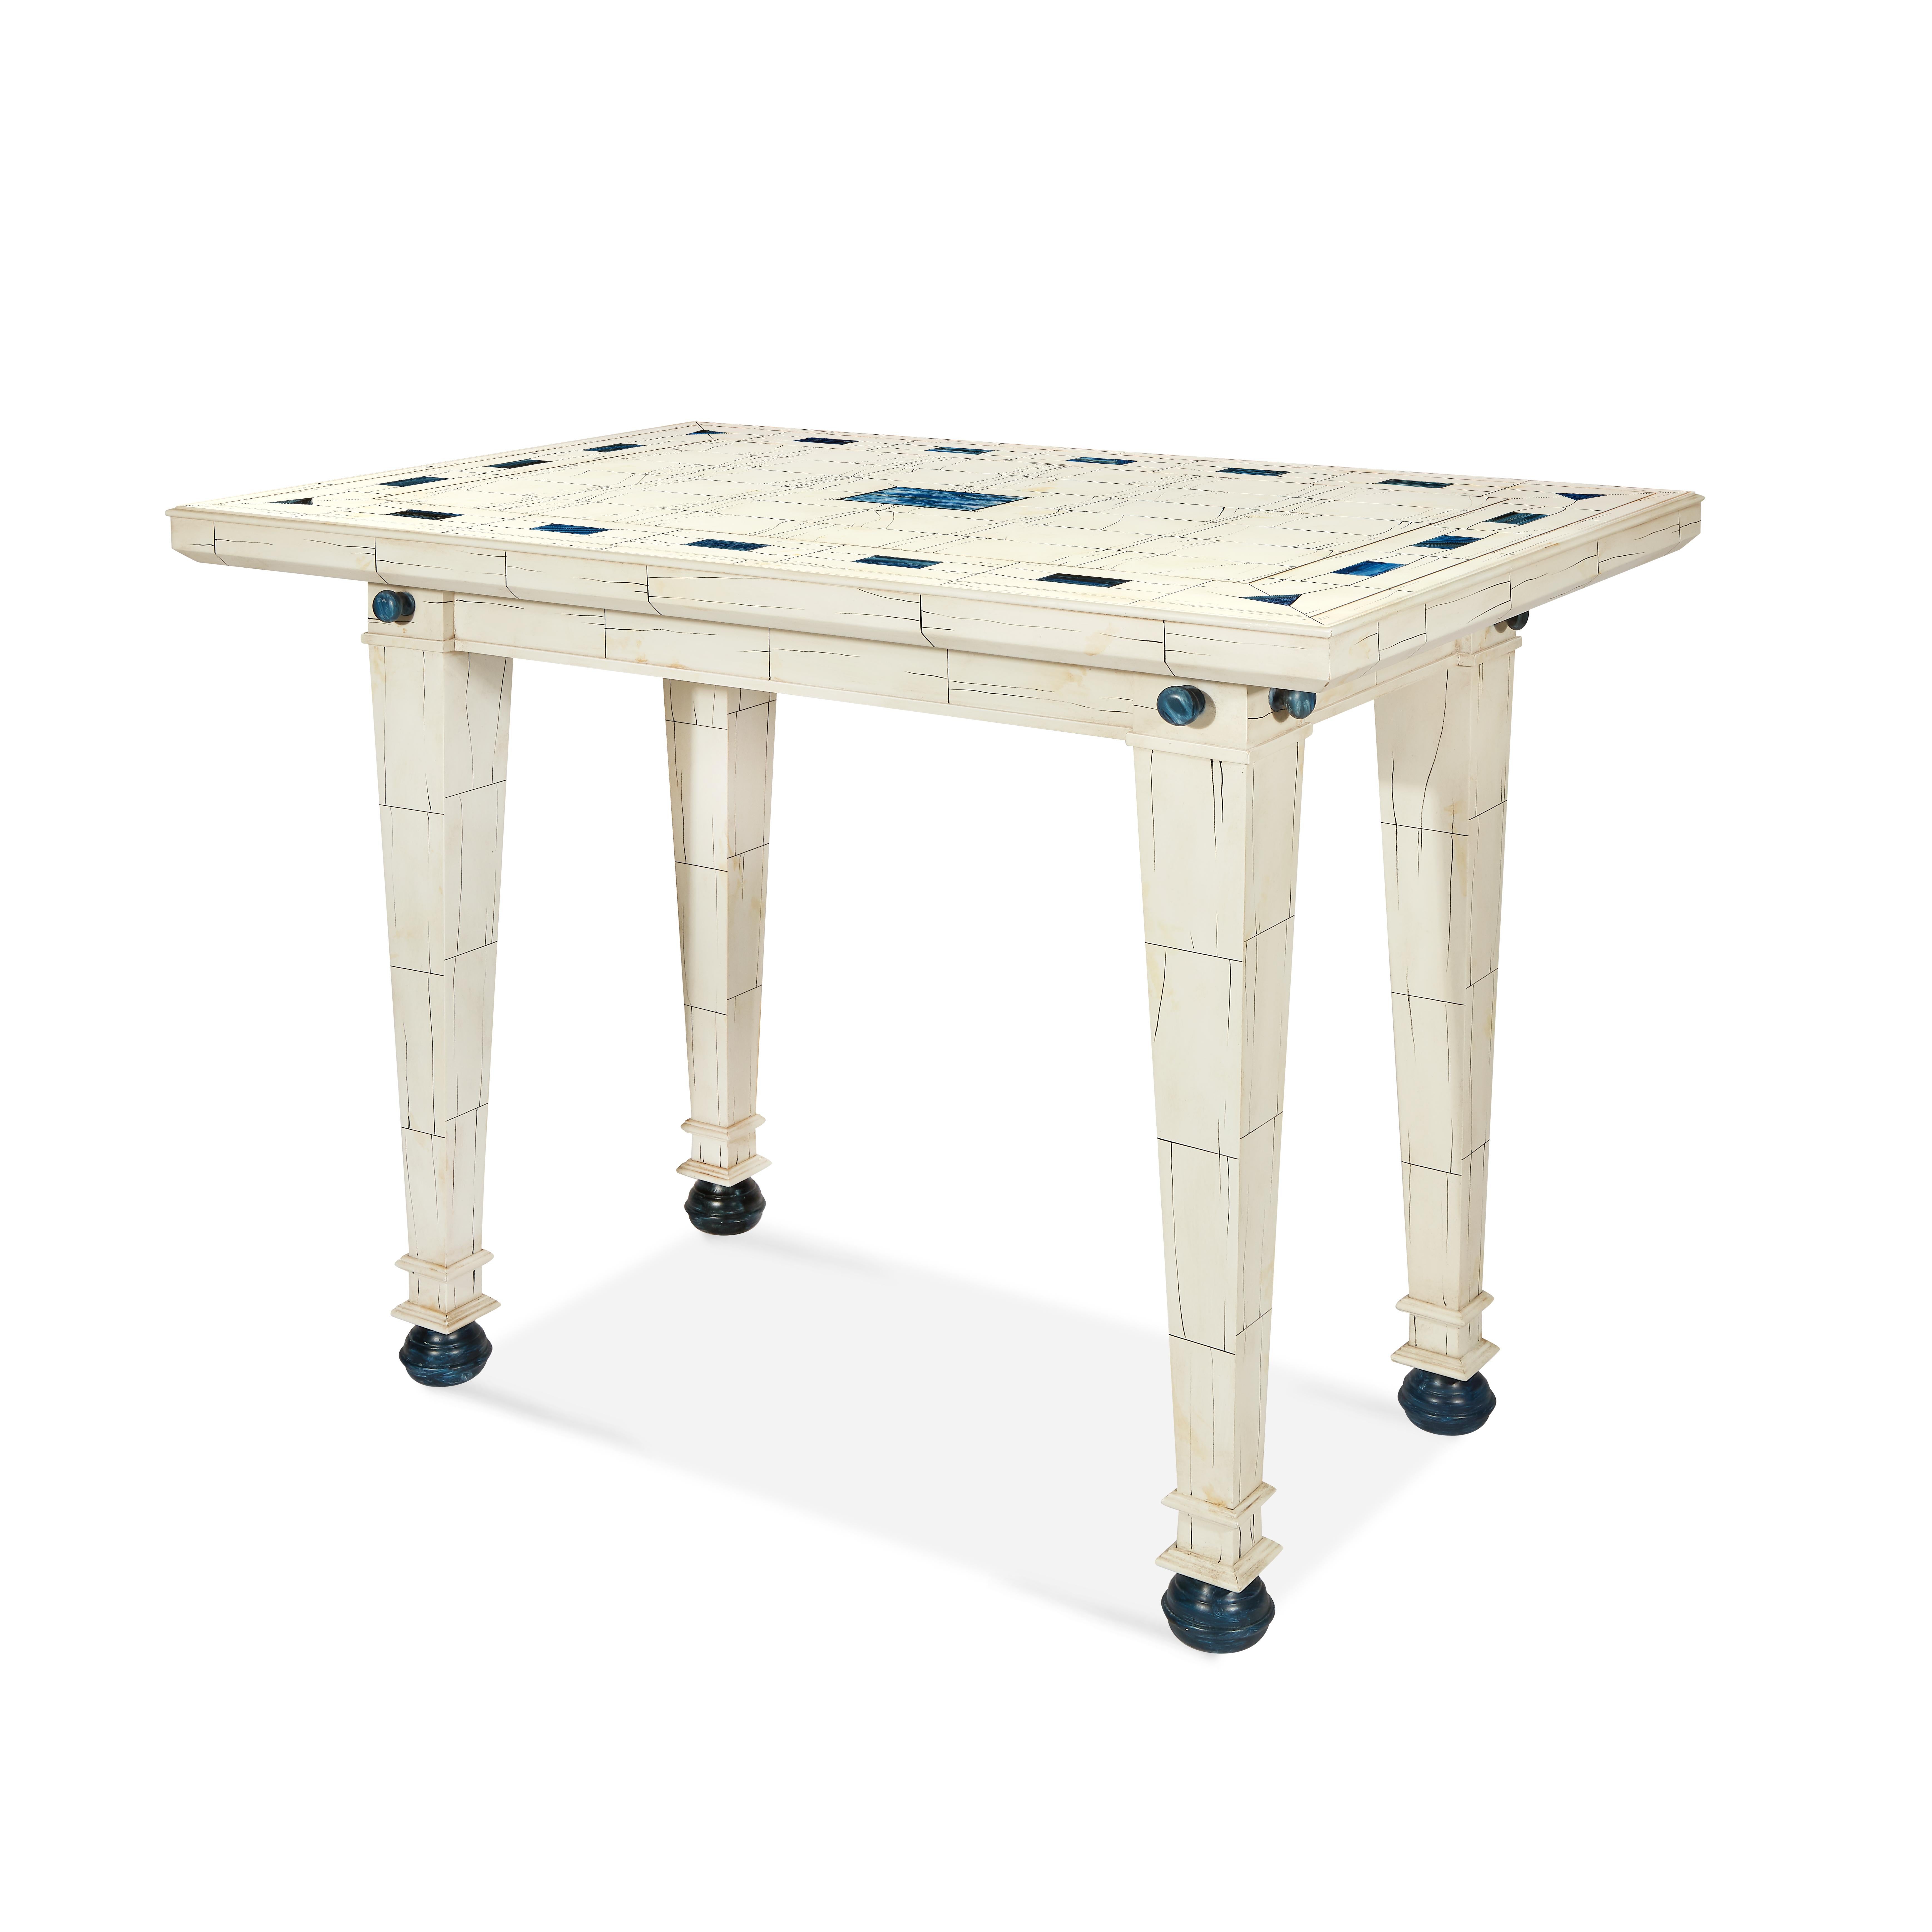 A faux painted ivory and lapis lazuli table, with its masterful brushwork, clean palette of whites, blues and blacks, is equally at home in contemporary or traditional rooms. Tapered legs with bun feet.
